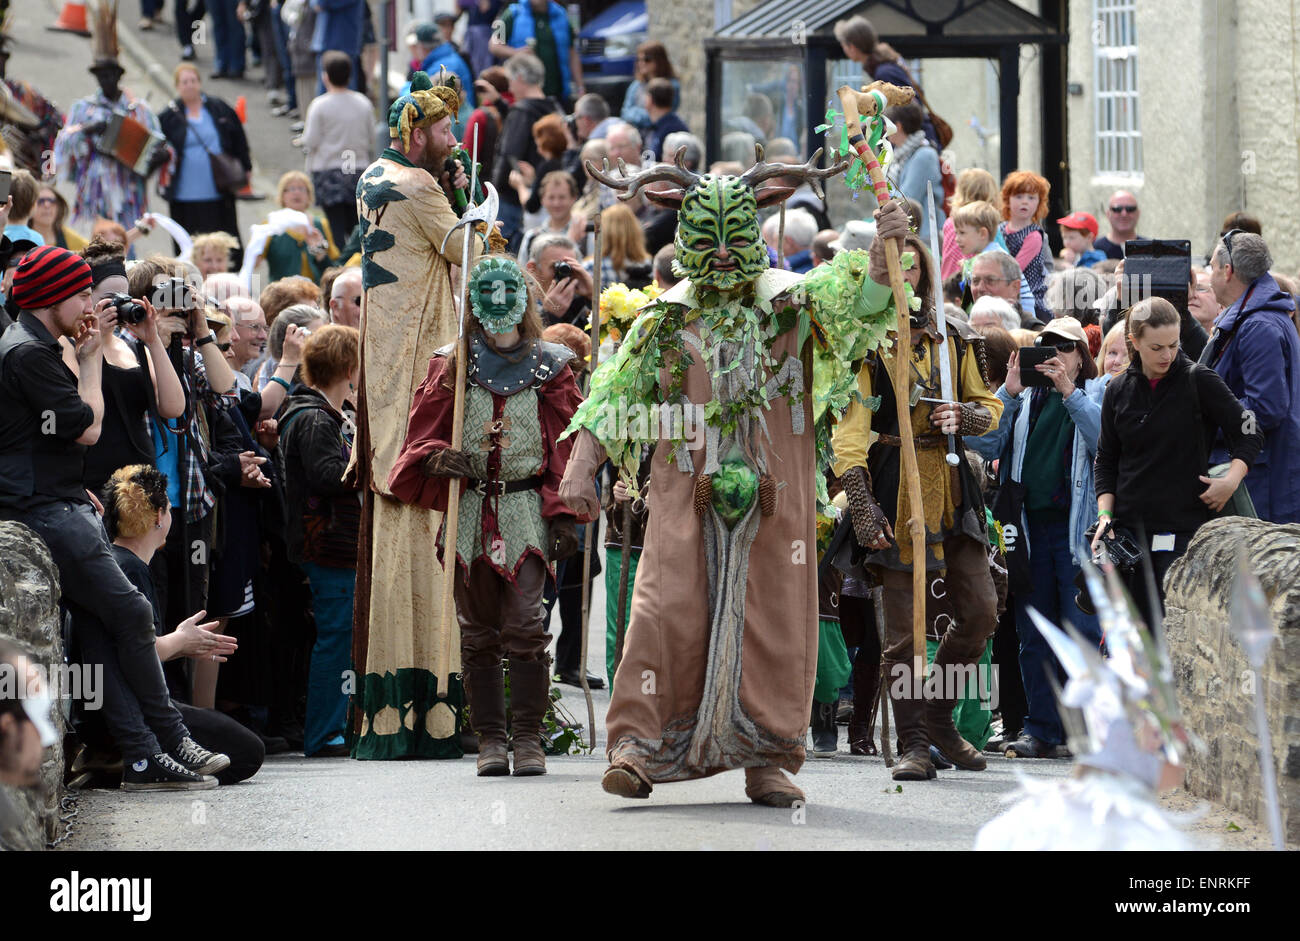 The Green Man festival at Clun in Shropshire May Day 2015 pagan festival britain uk. Picture by Dave Bagnall Photography Stock Photo